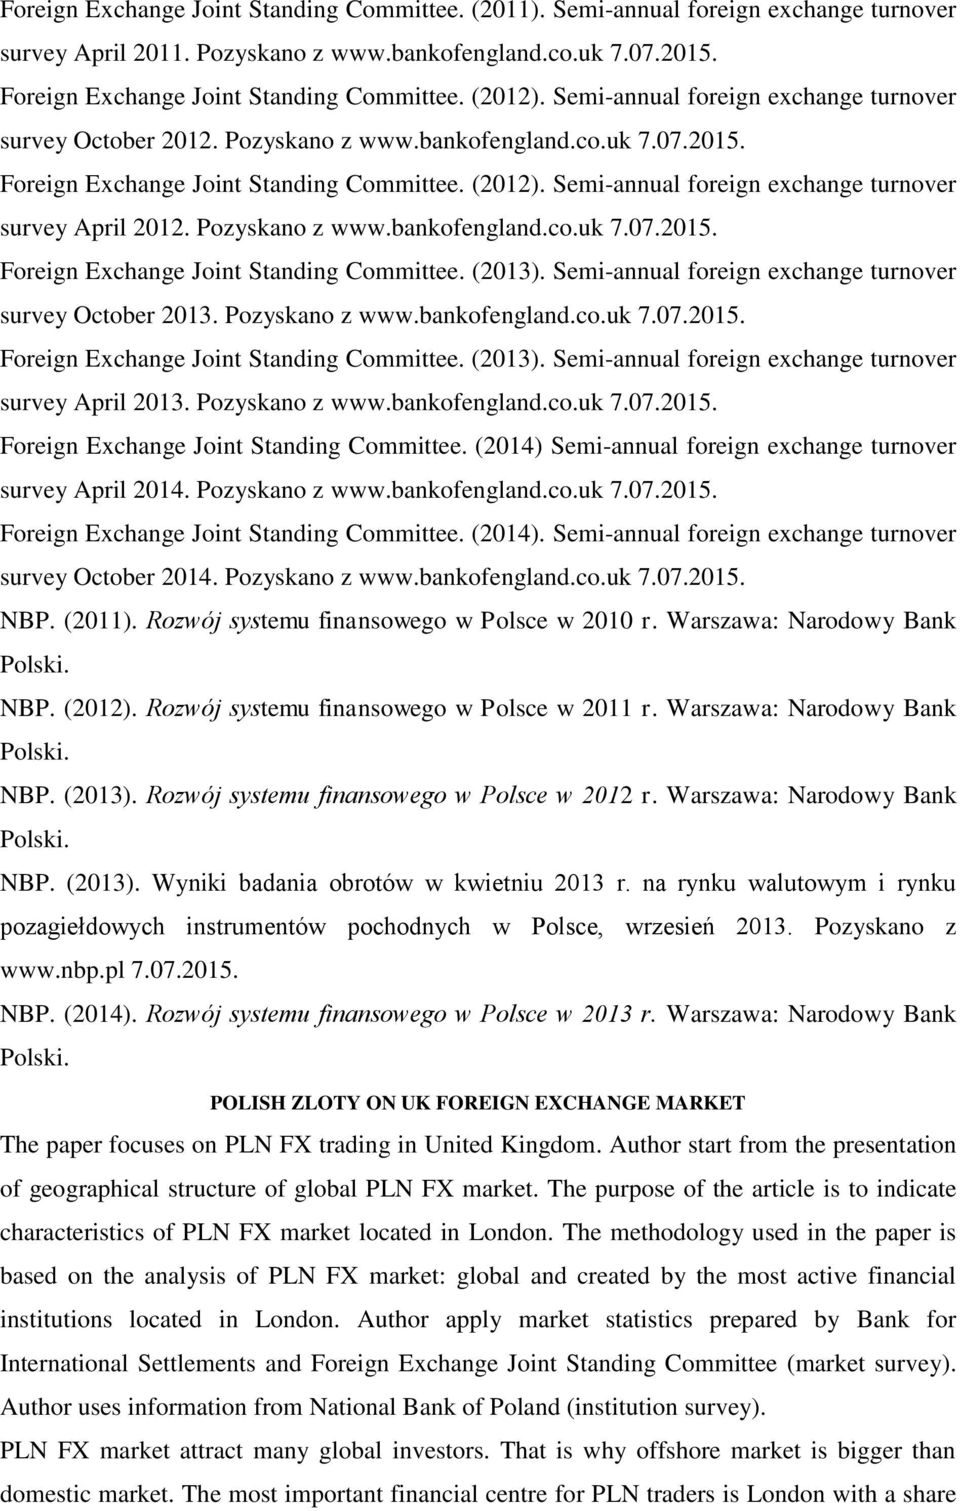 Semi-annual foreign exchange turnover survey April 2012. Pozyskano z www.bankofengland.co.uk 7.07.2015. Foreign Exchange Joint Standing Committee. (2013).